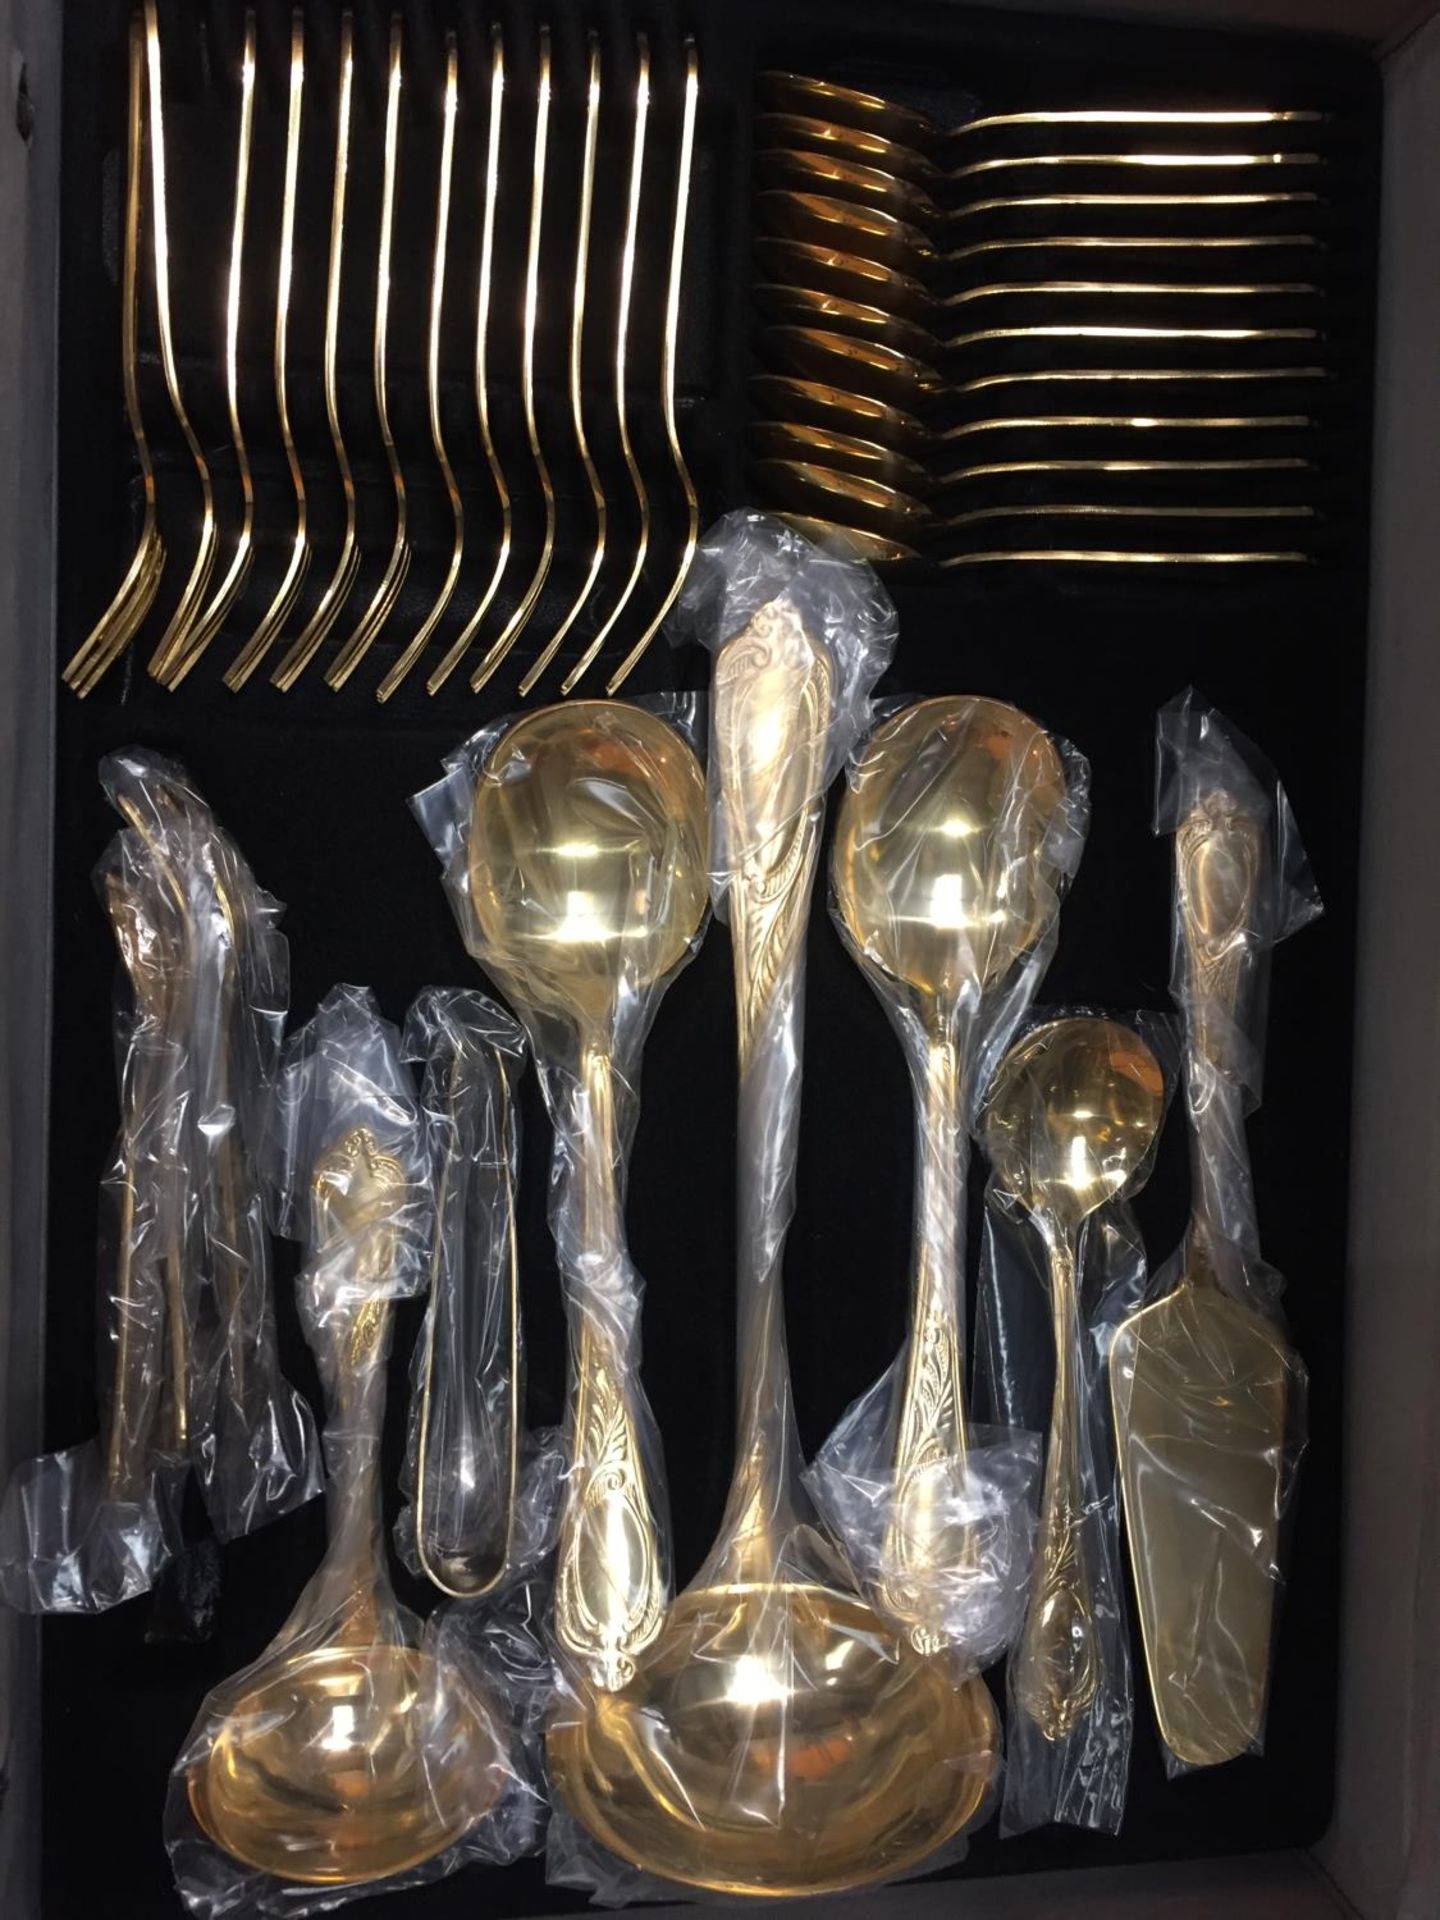 A TWELVE SETTING GOLD PLATED CANTEEN OF CUTLERY WITH SERVING SPOONS,LADELS, CAKE FORKS ETC IN A CASE - Image 3 of 5